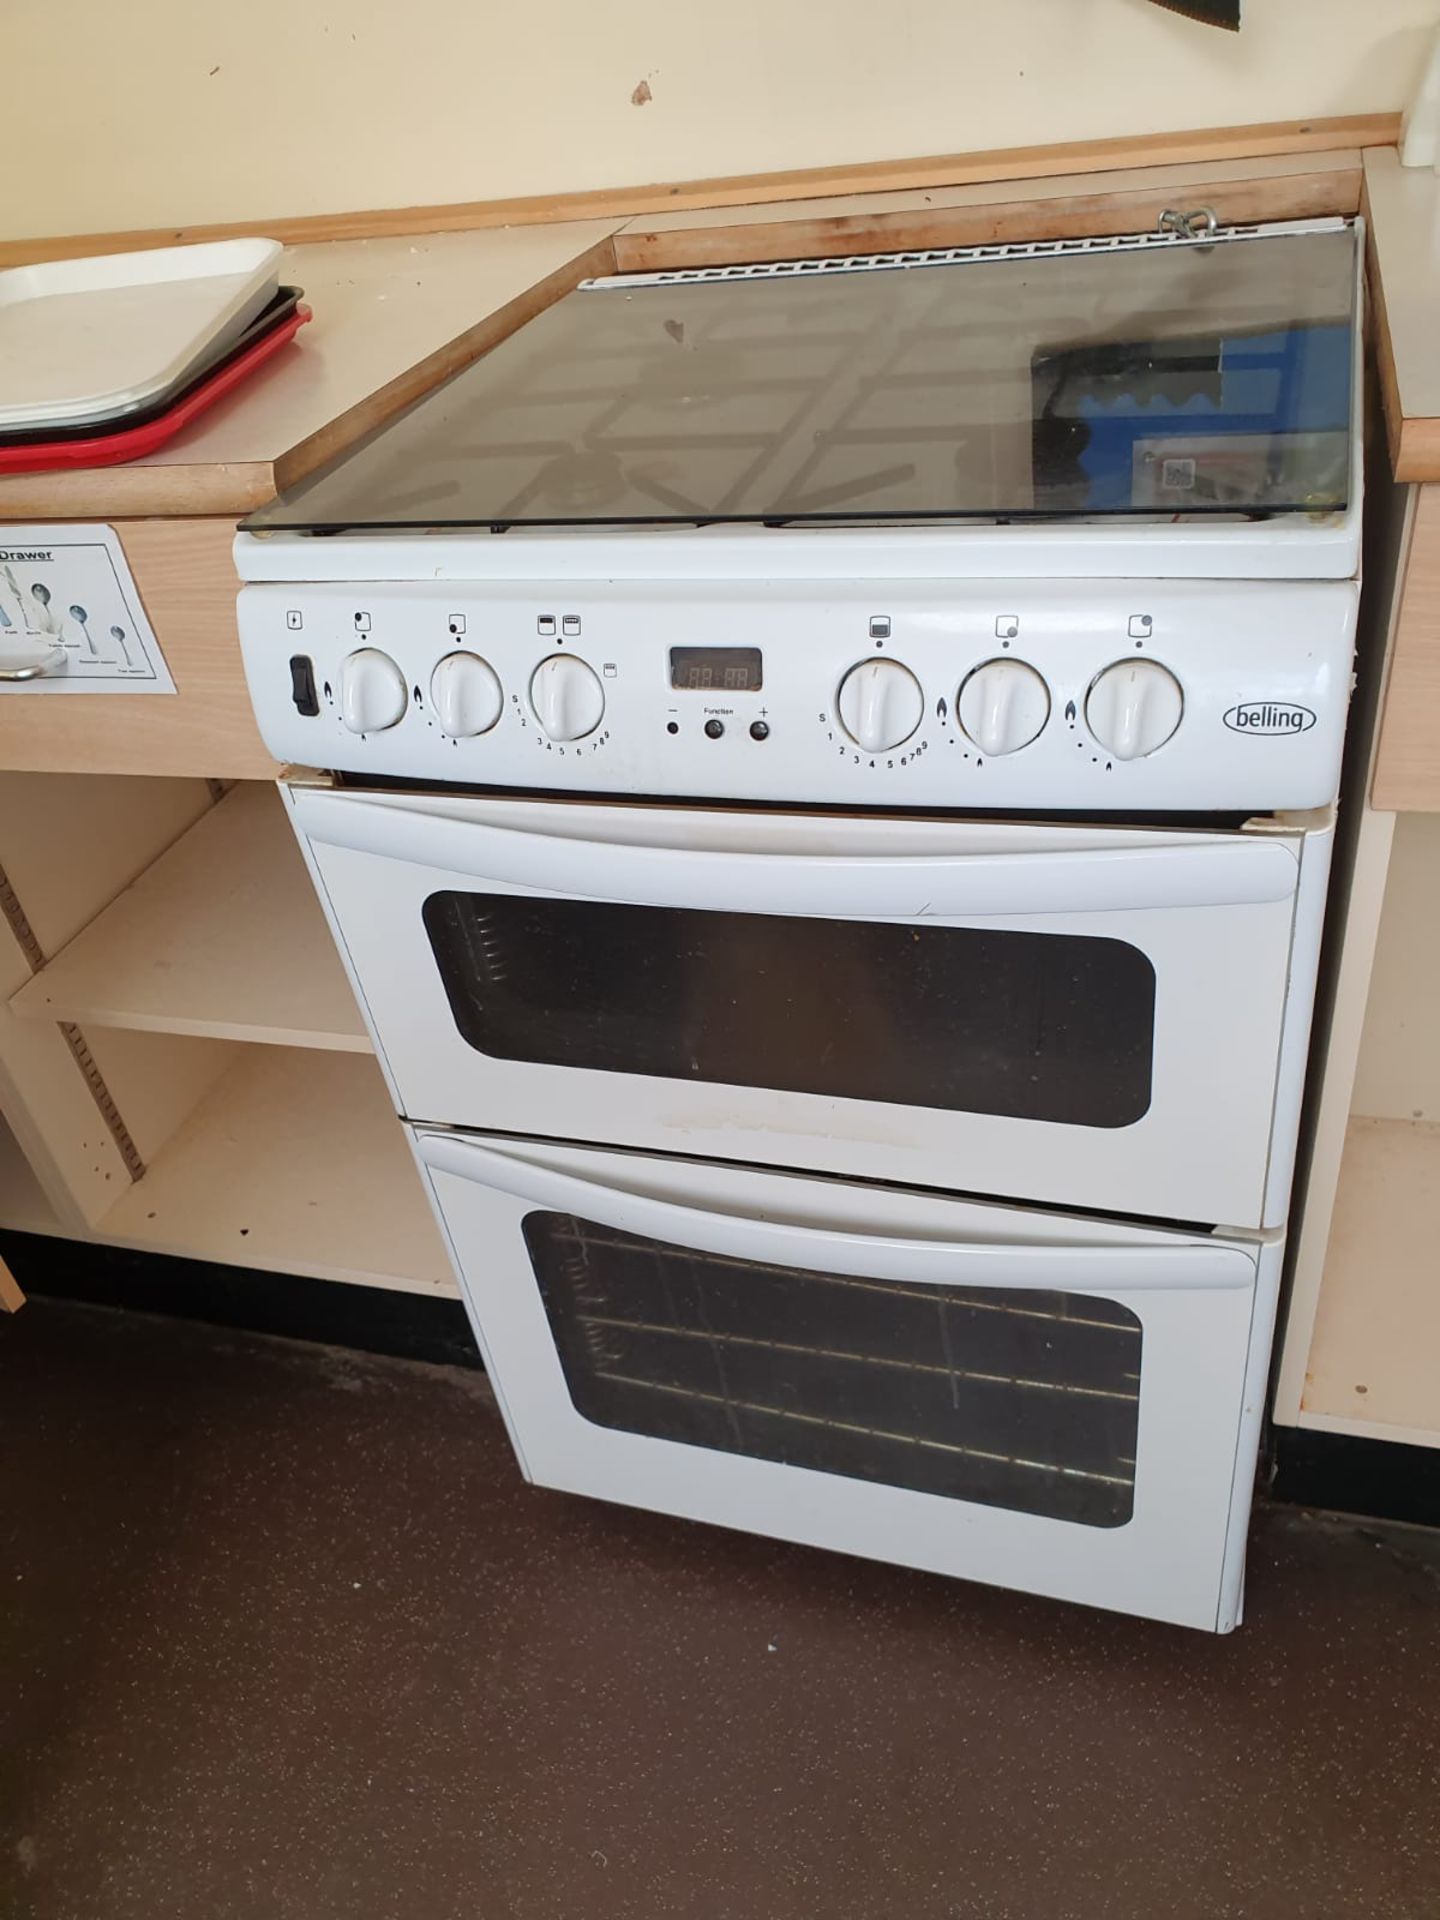 7 x Assorted Cookers By Hotpoint, Belling, Indesit etc - Previously Used For Educational - Image 2 of 7